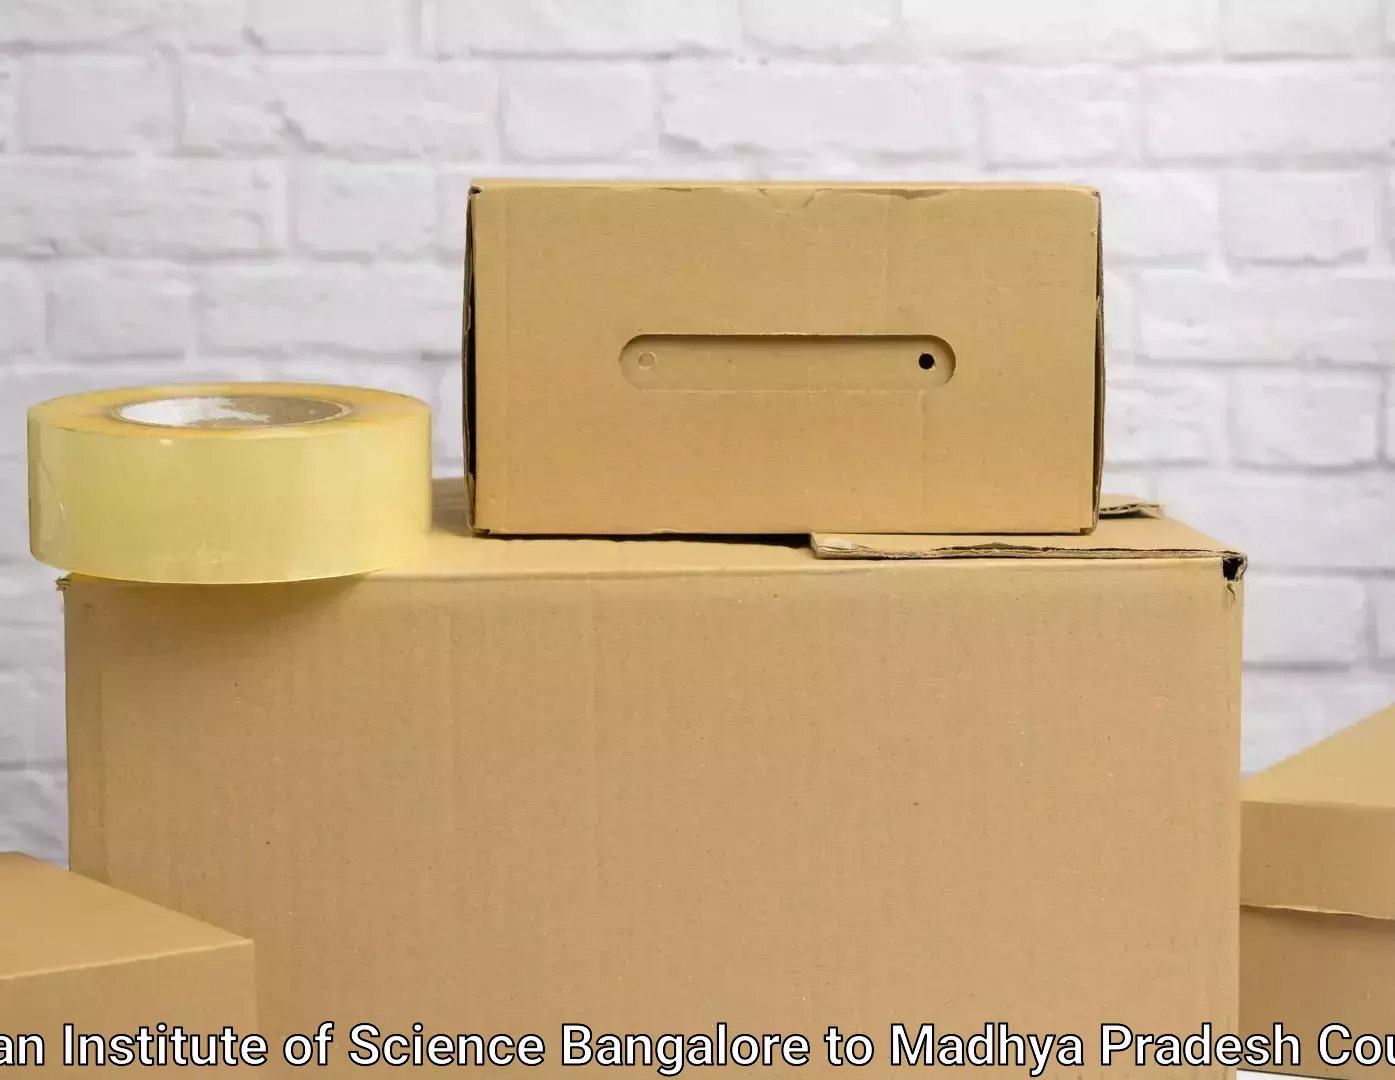 Furniture relocation experts in Indian Institute of Science Bangalore to Dindori